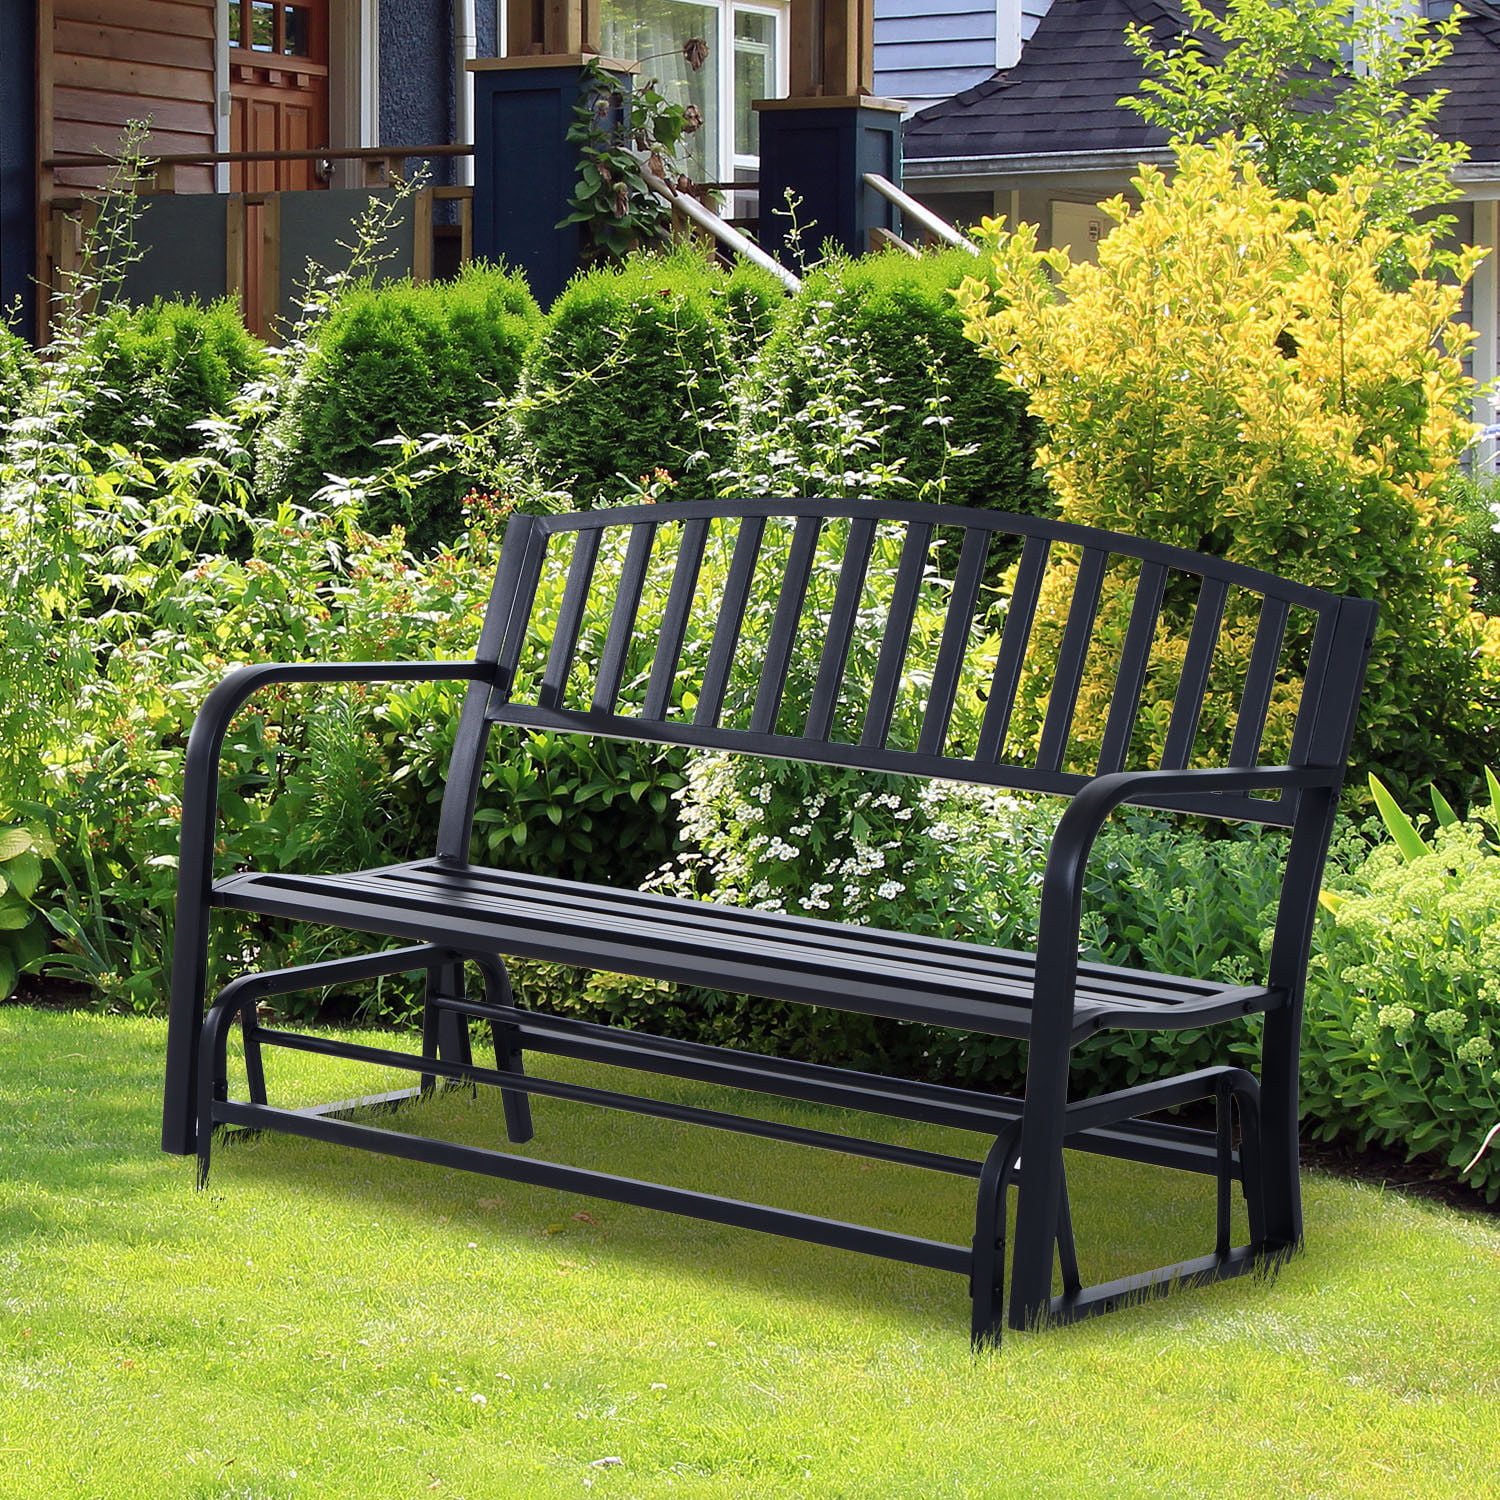 L x W x H Tidyard 2 Persons Patio Glider Bench Outdoor Swing Black Porch Chair Steel Rocking Glider Bench Seating 50 x 26 x 34 